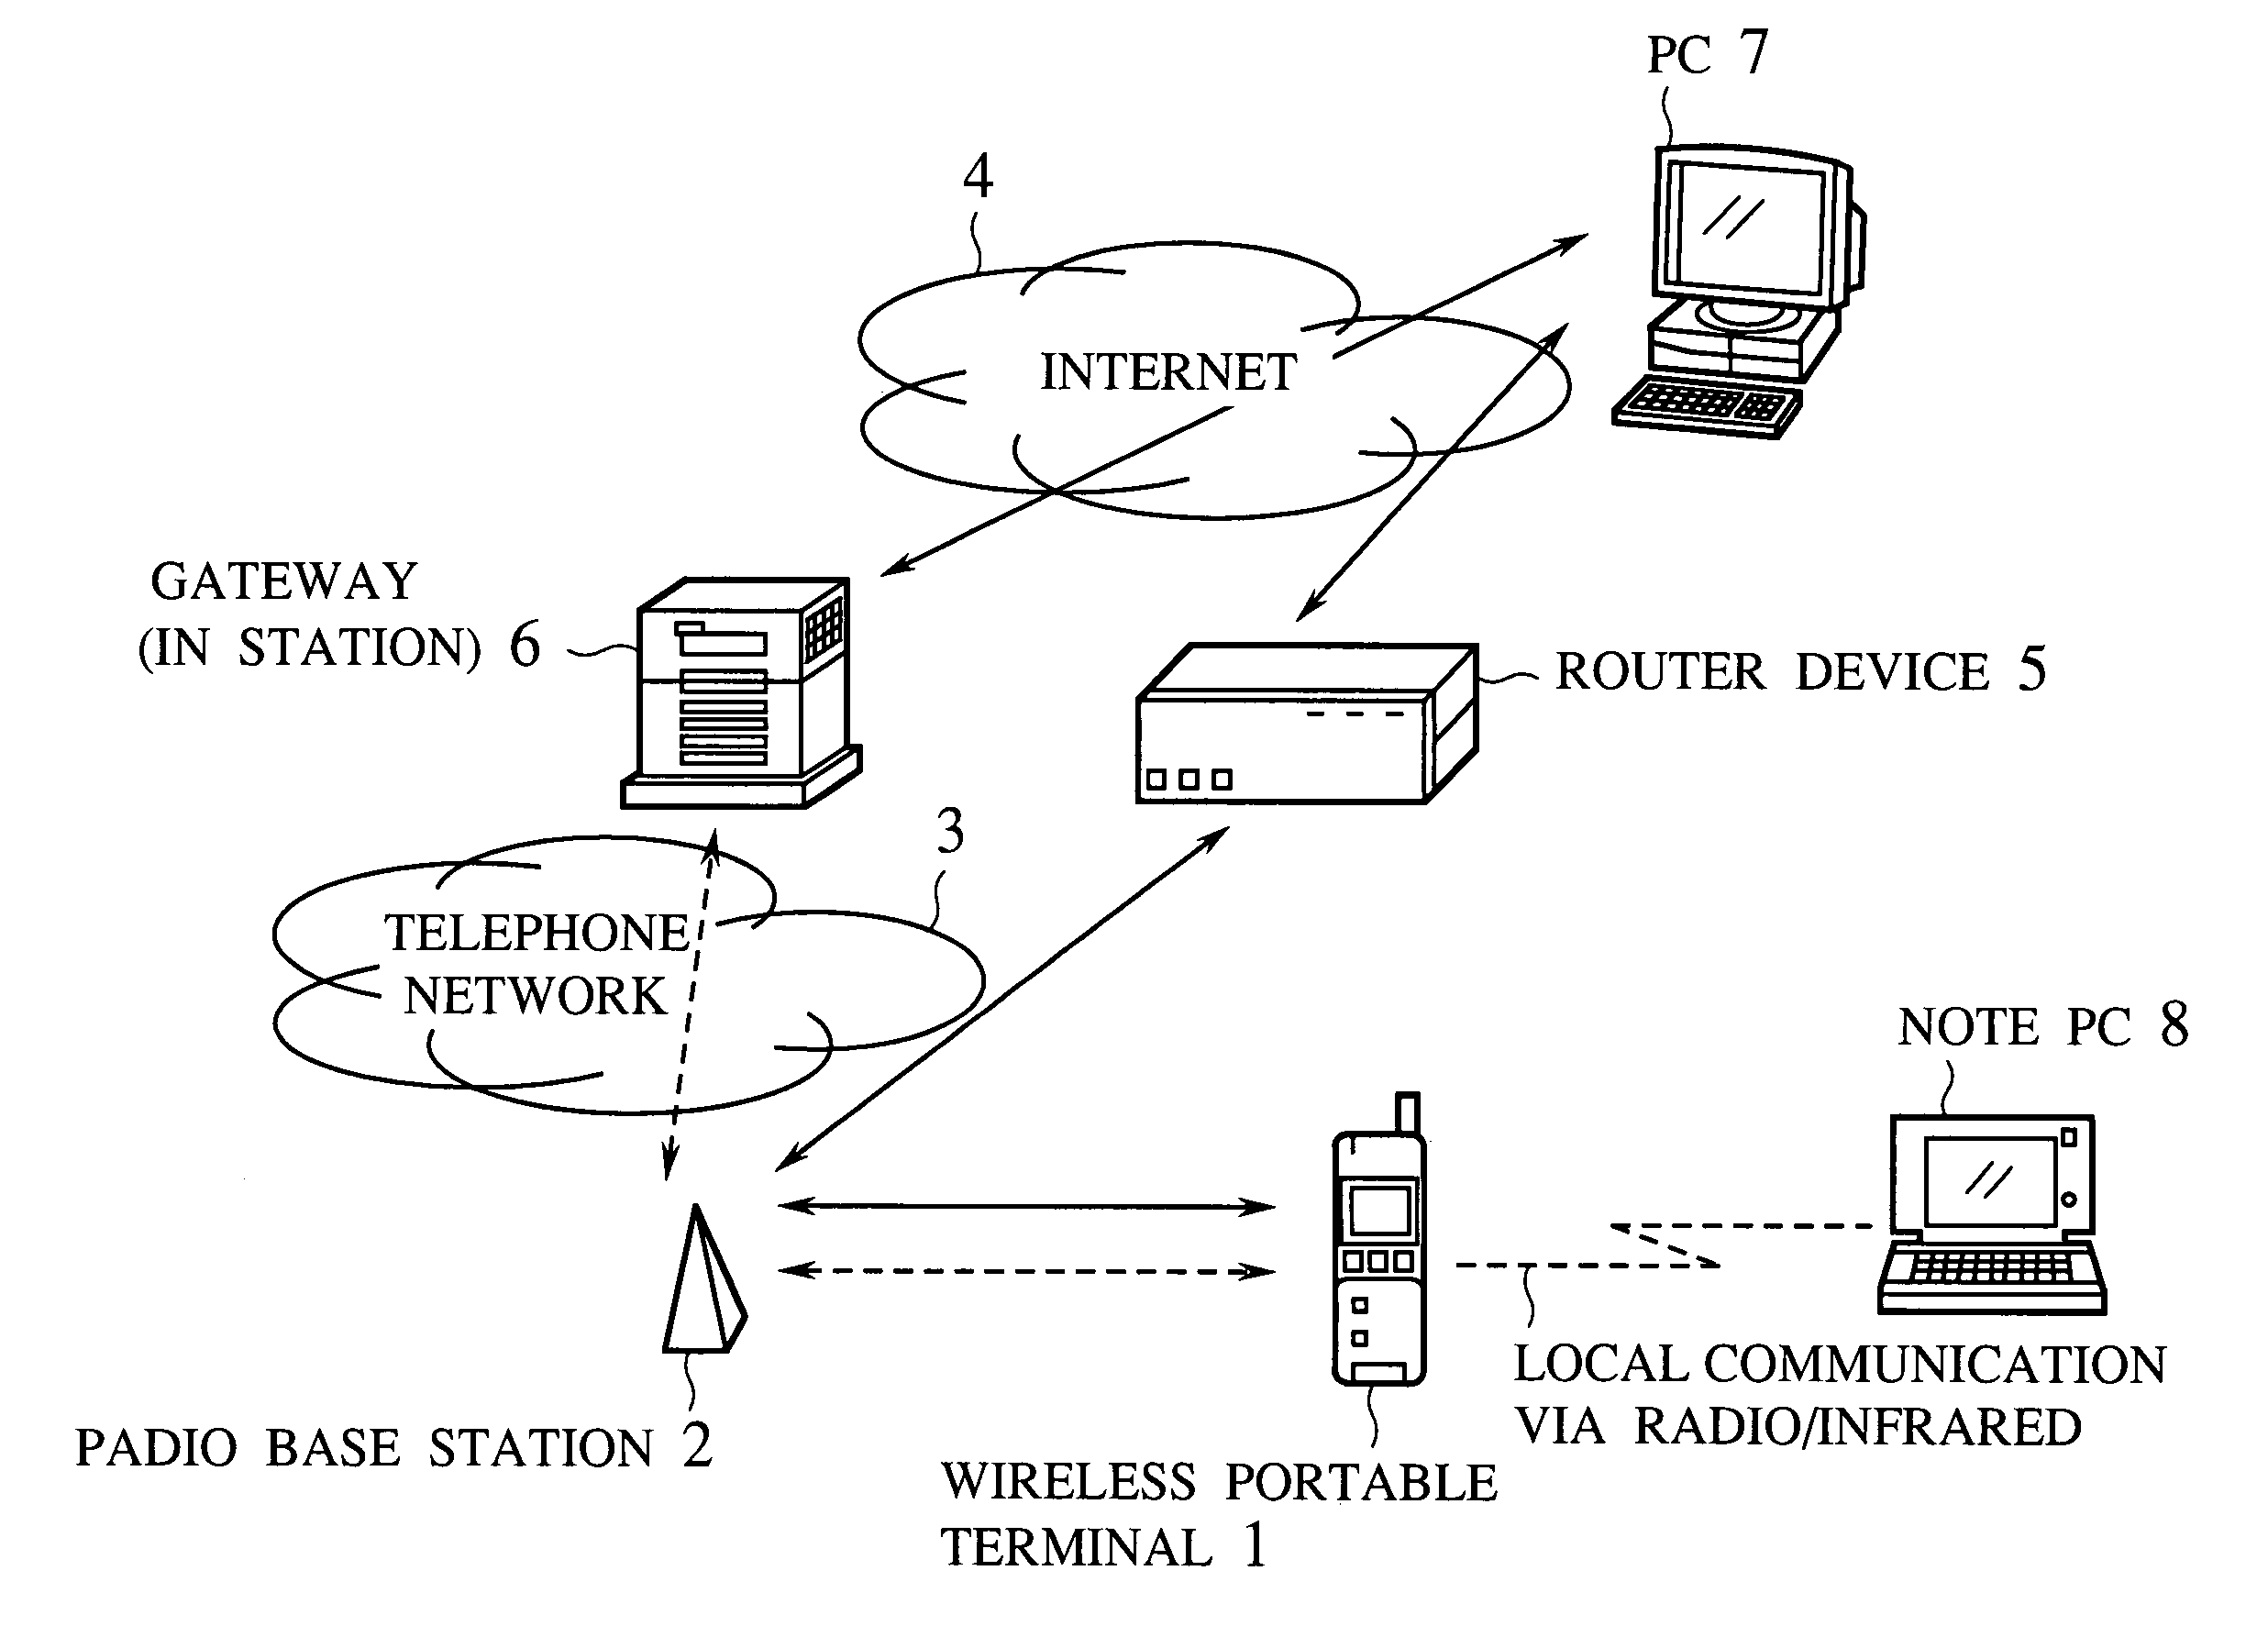 Communication scheme for realizing effective data input/setup in compact size portable terminal device using locally connected nearby computer device